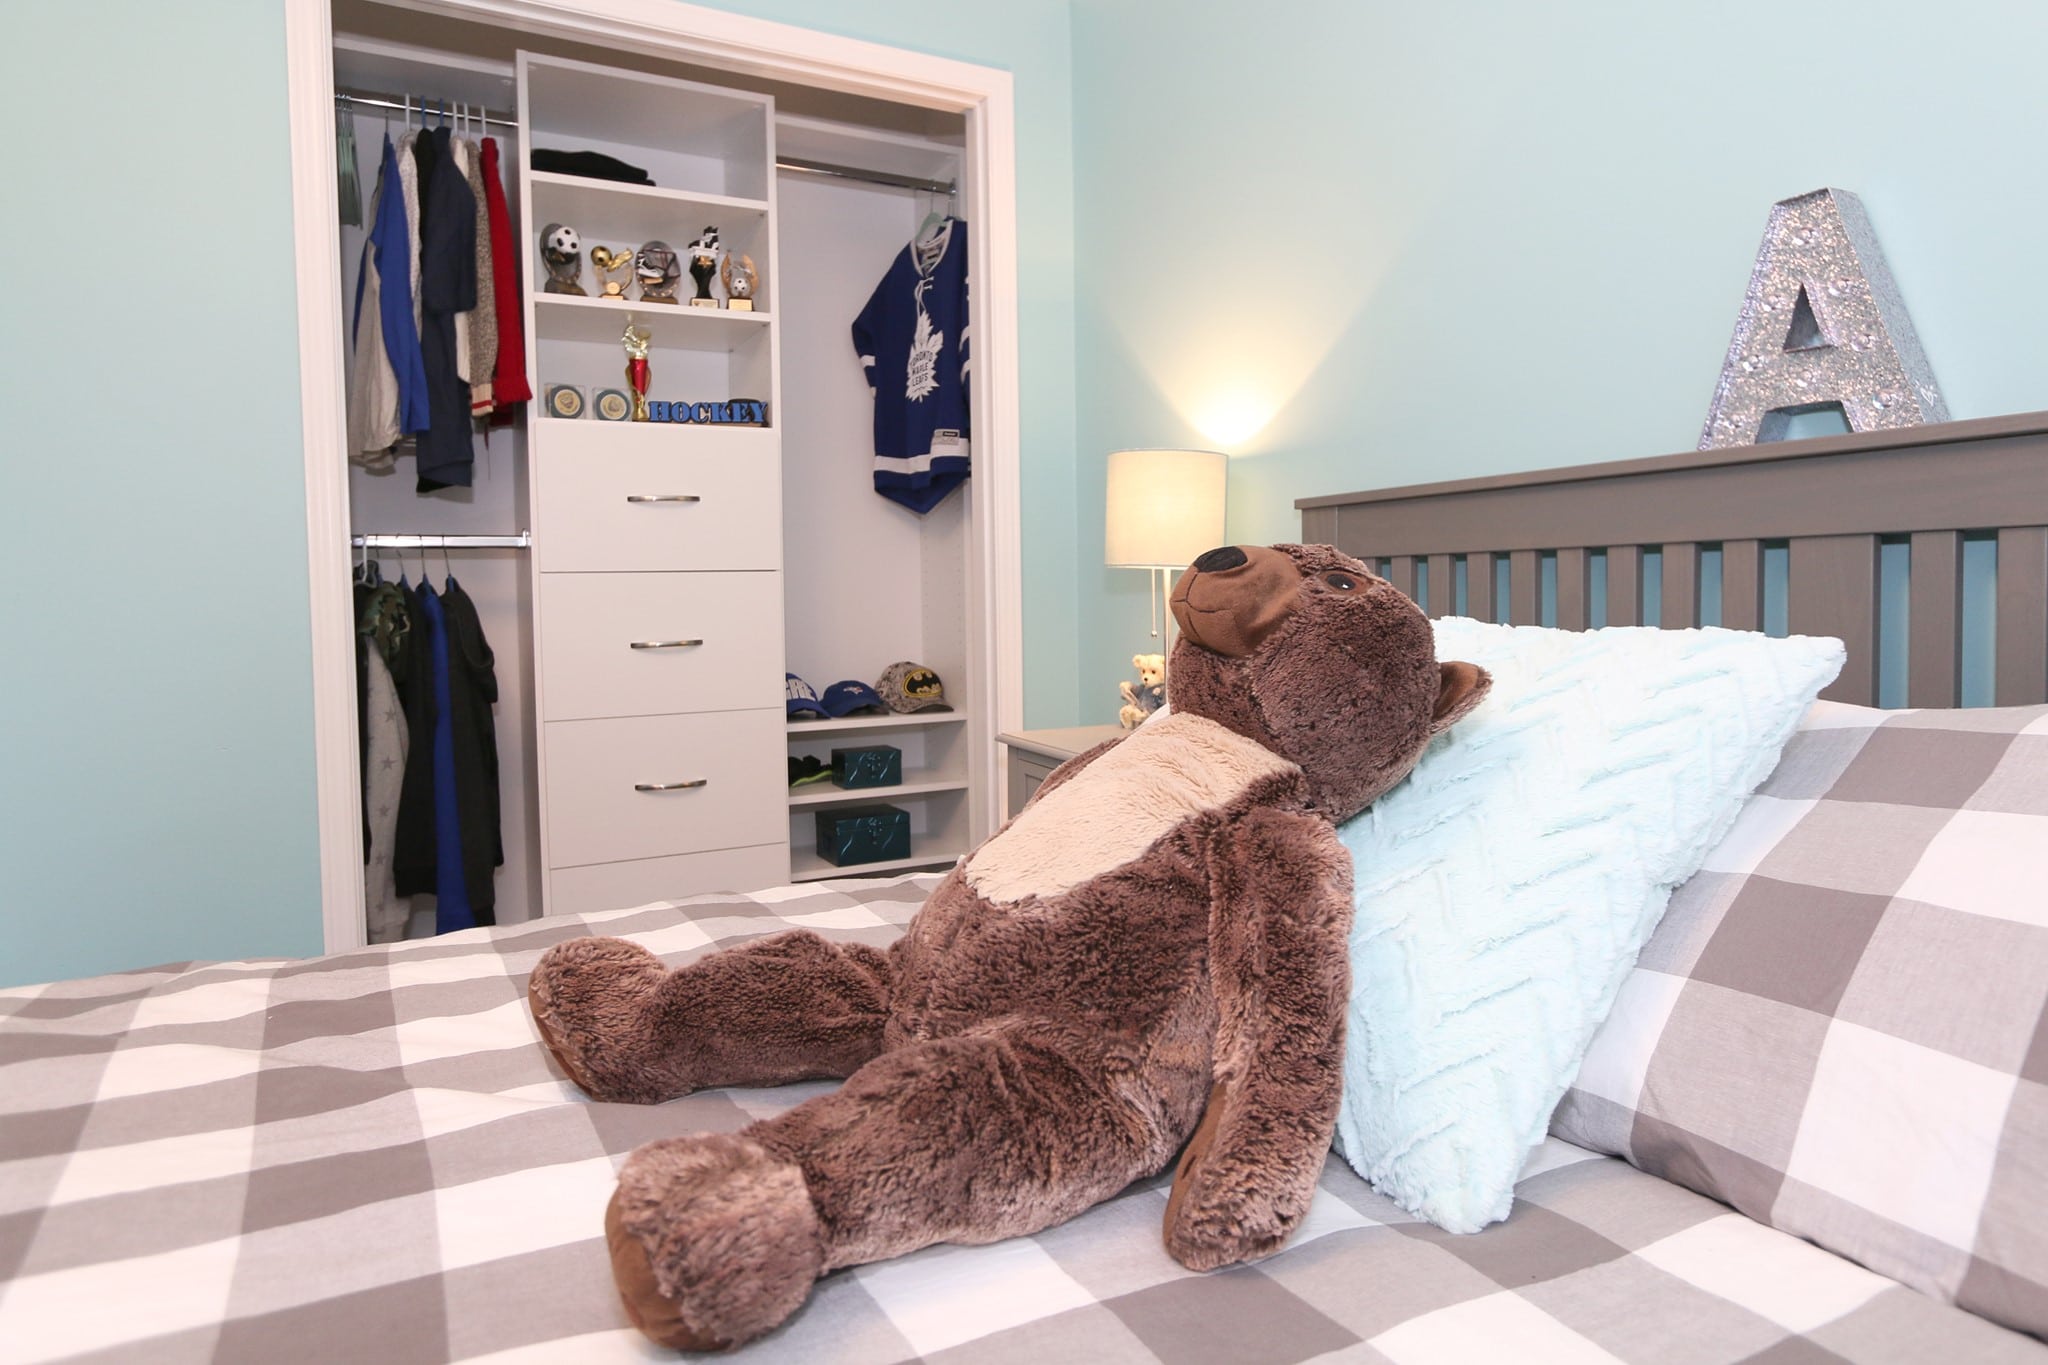 bear 5 ways to organize your child's room + make it fabulous